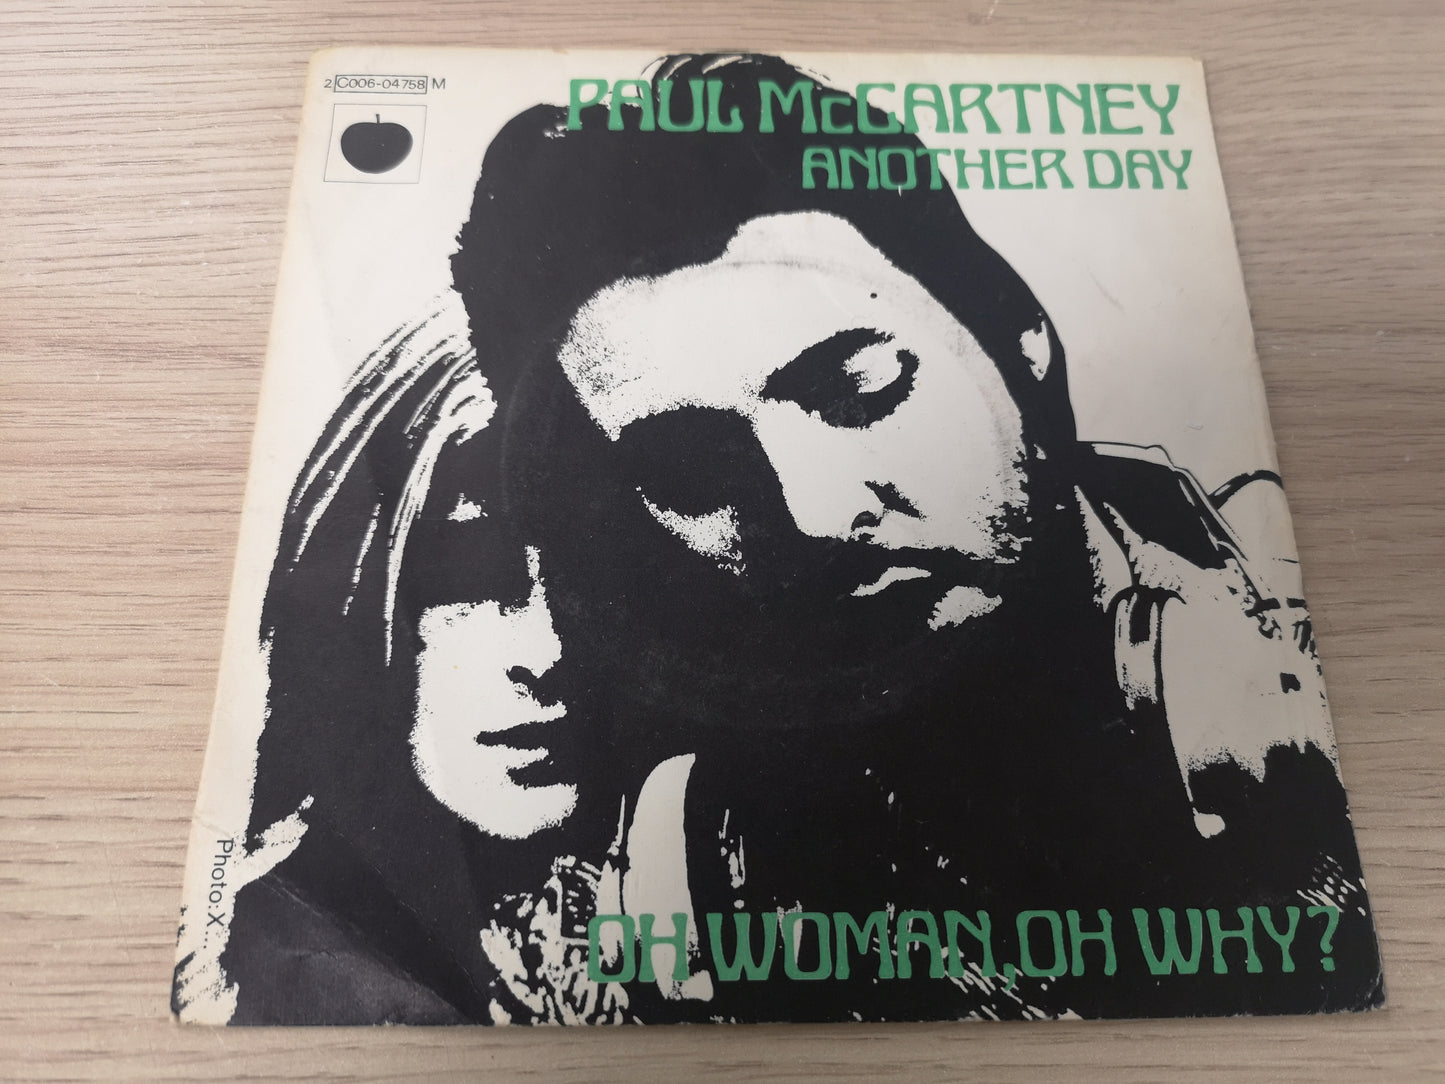 Paul McCartney "Another Day" Orig France 1971 EX/EX (7" Single)